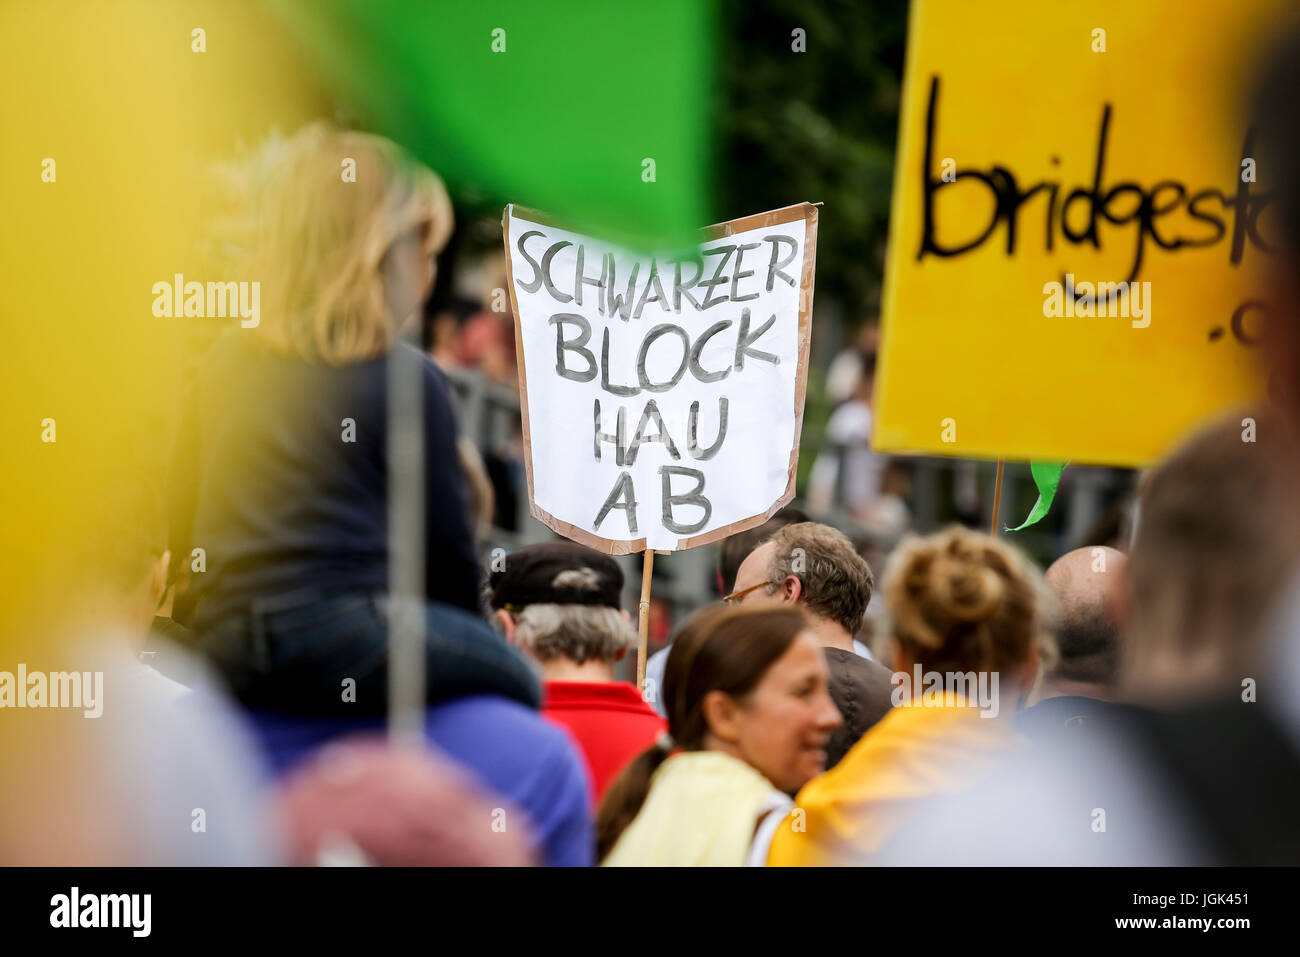 Hamburg, Germany. 8th July, 2017. A protestor holds a placard with the slogan 'get lost black bloc' at the 'Borderless Solidarity rather than G20' demonstration in Hamburg, Germany, 8 July 2017. The two-day summit, a meeting of the leaders of the twenty largest world economies as well as representatives of a variety of international institutions, has been met with a wave of protests. Photo: Sina Schuldt/dpa/Alamy Live News Stock Photo